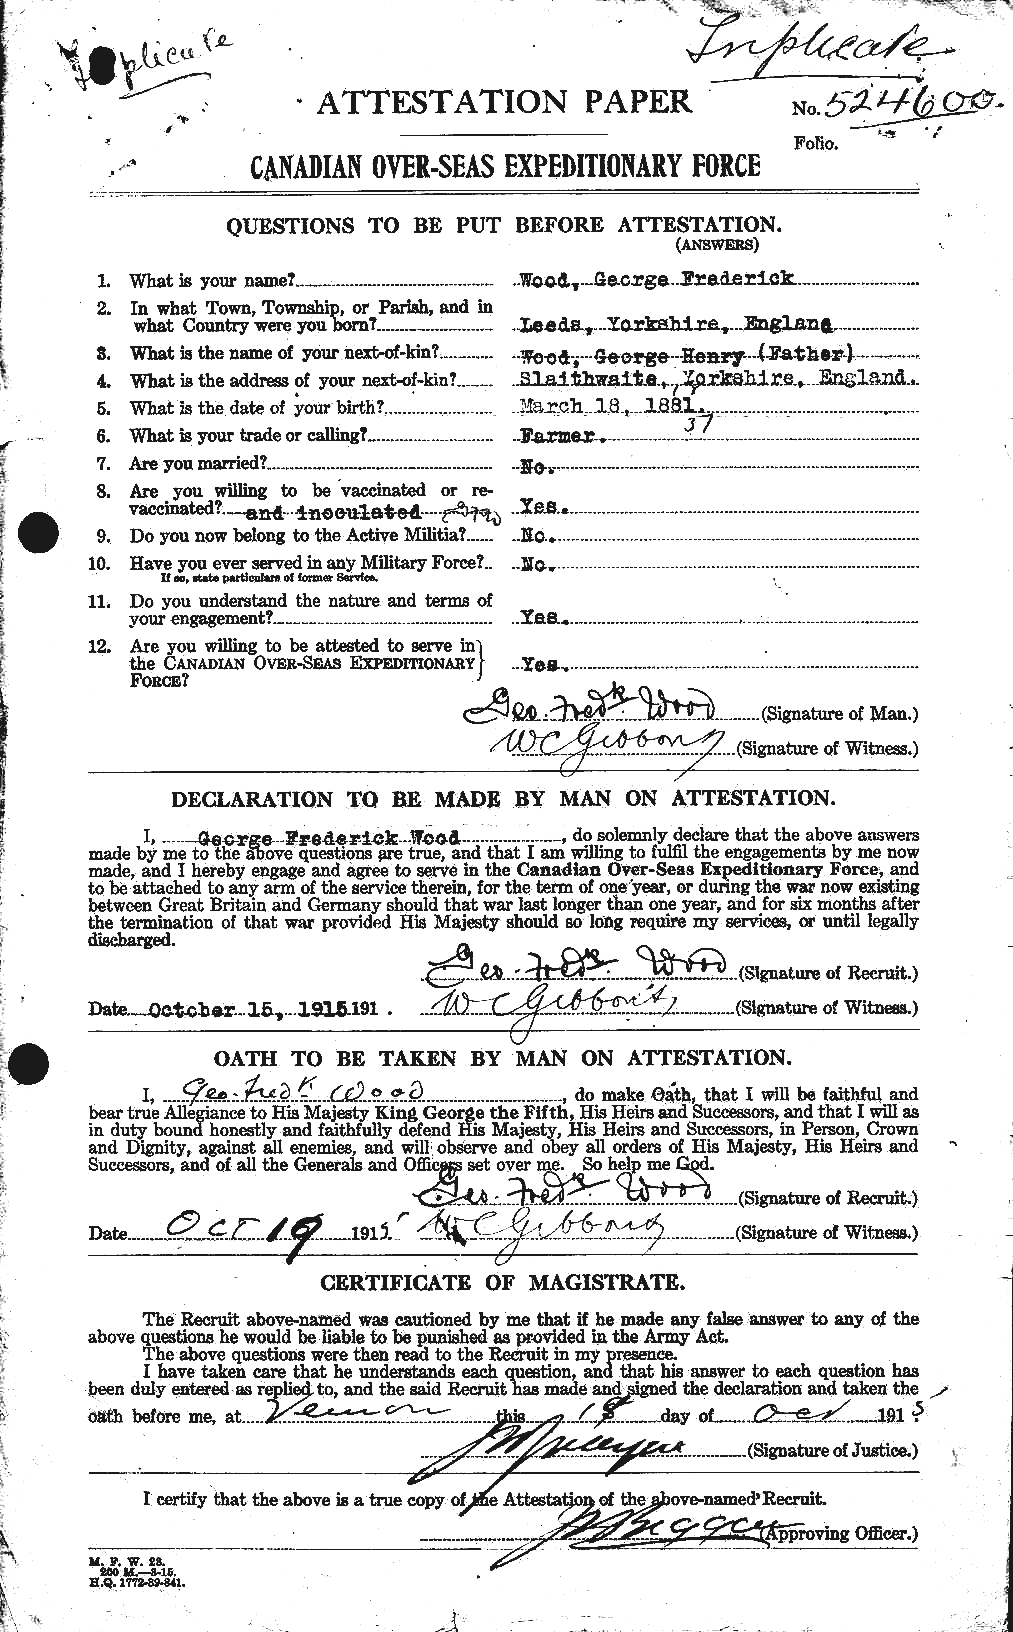 Personnel Records of the First World War - CEF 683147a